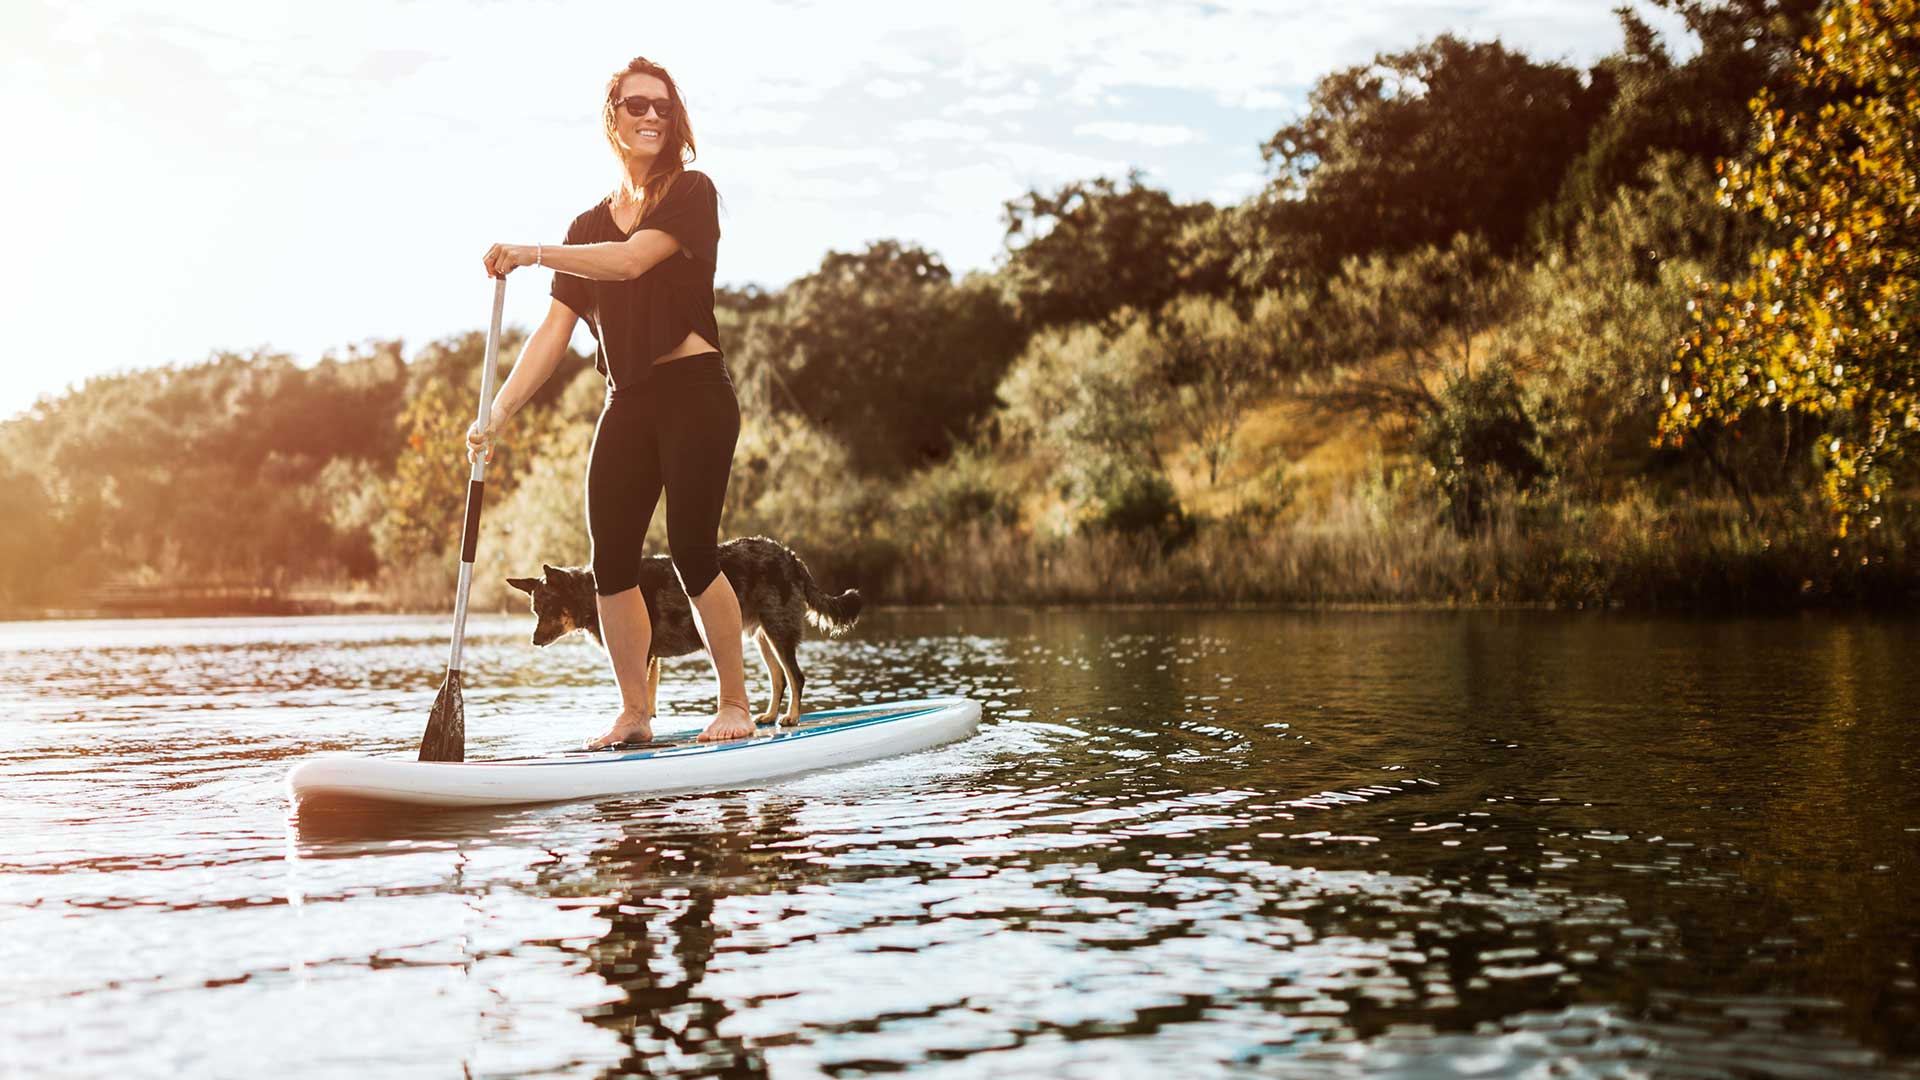 A woman on a paddle board with her dog.